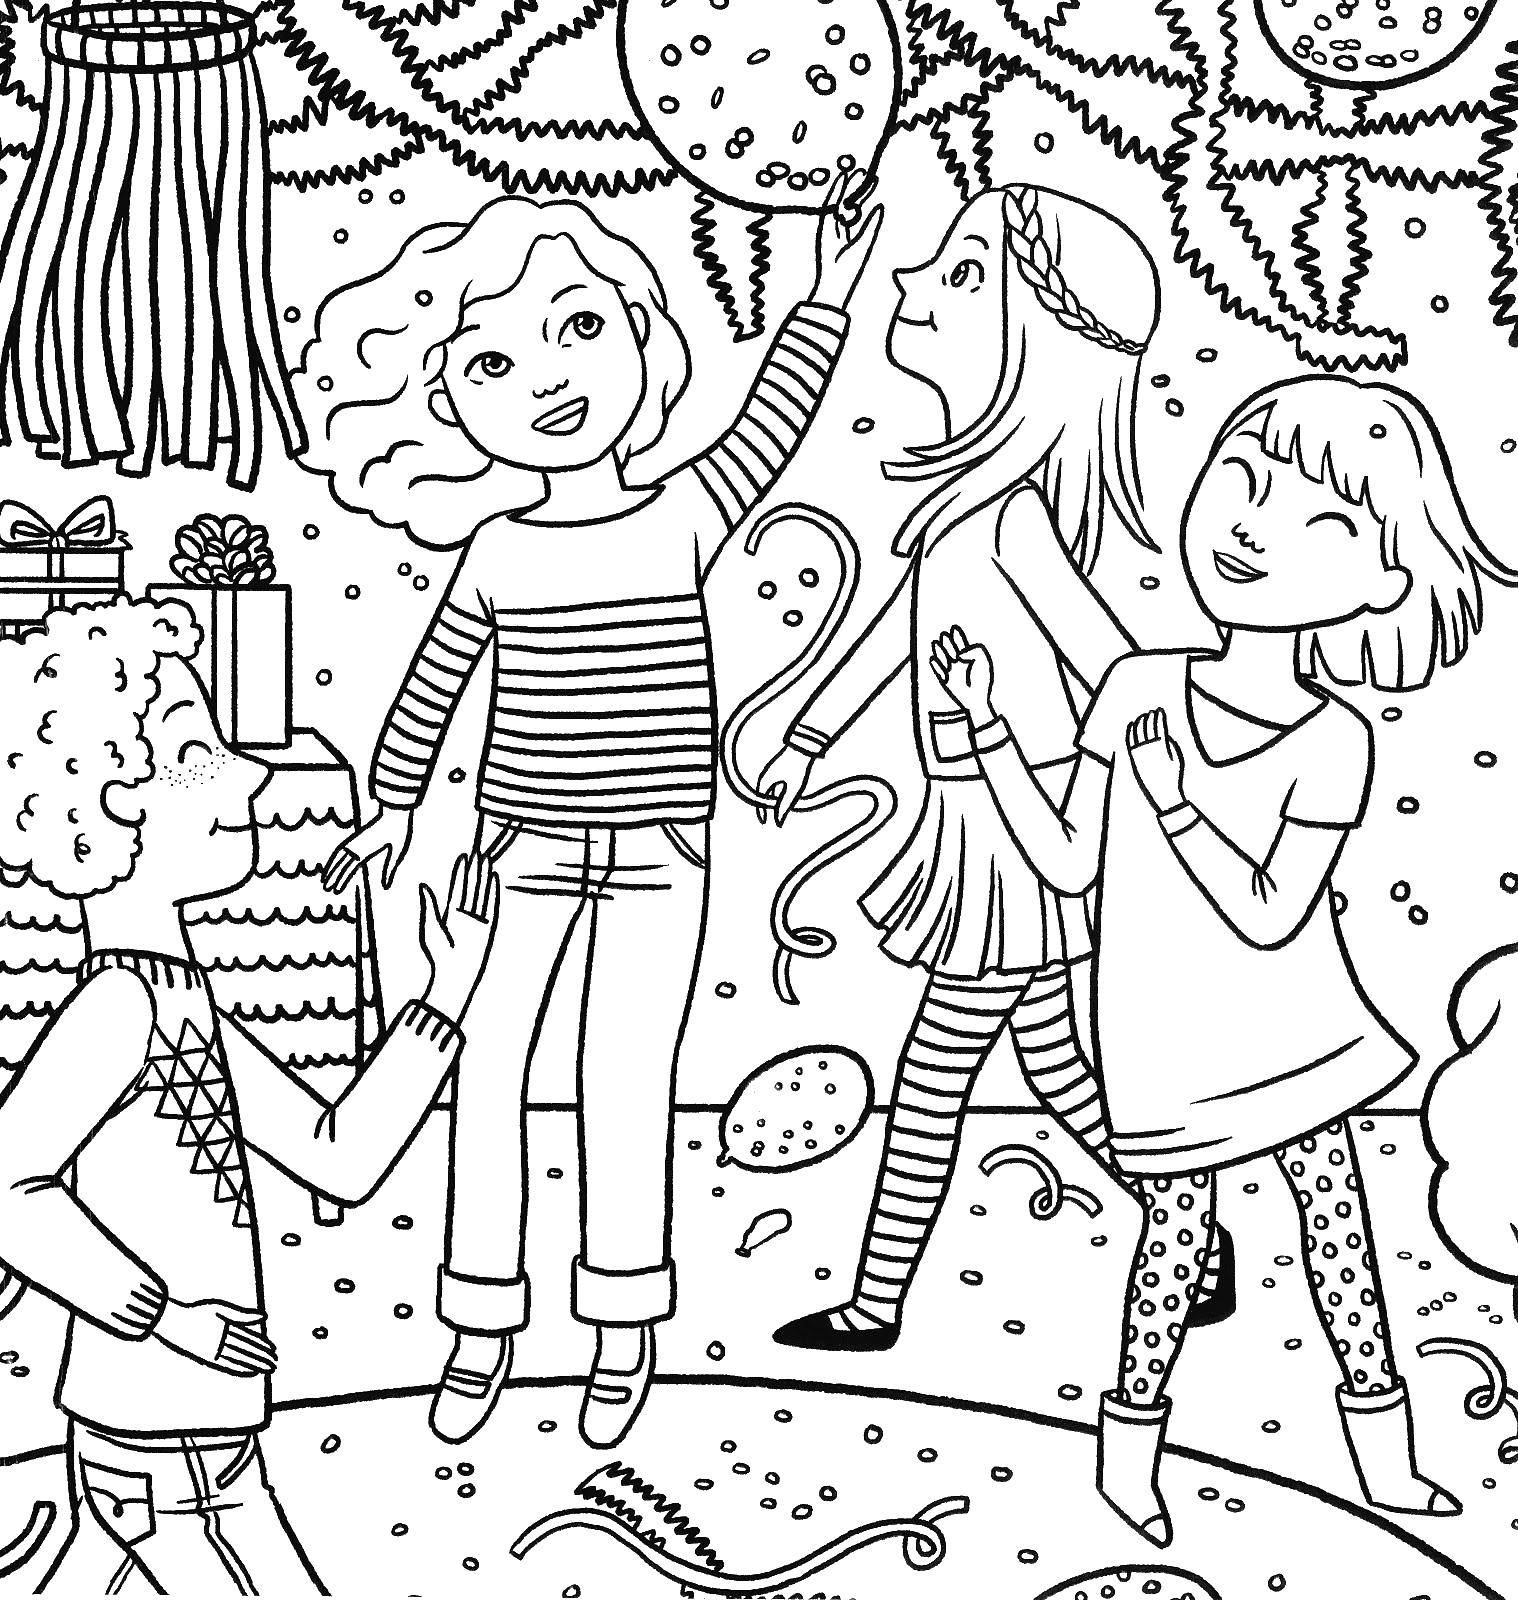 Coloring Girls at the party. Category coloring. Tags:  holiday, party, girls.